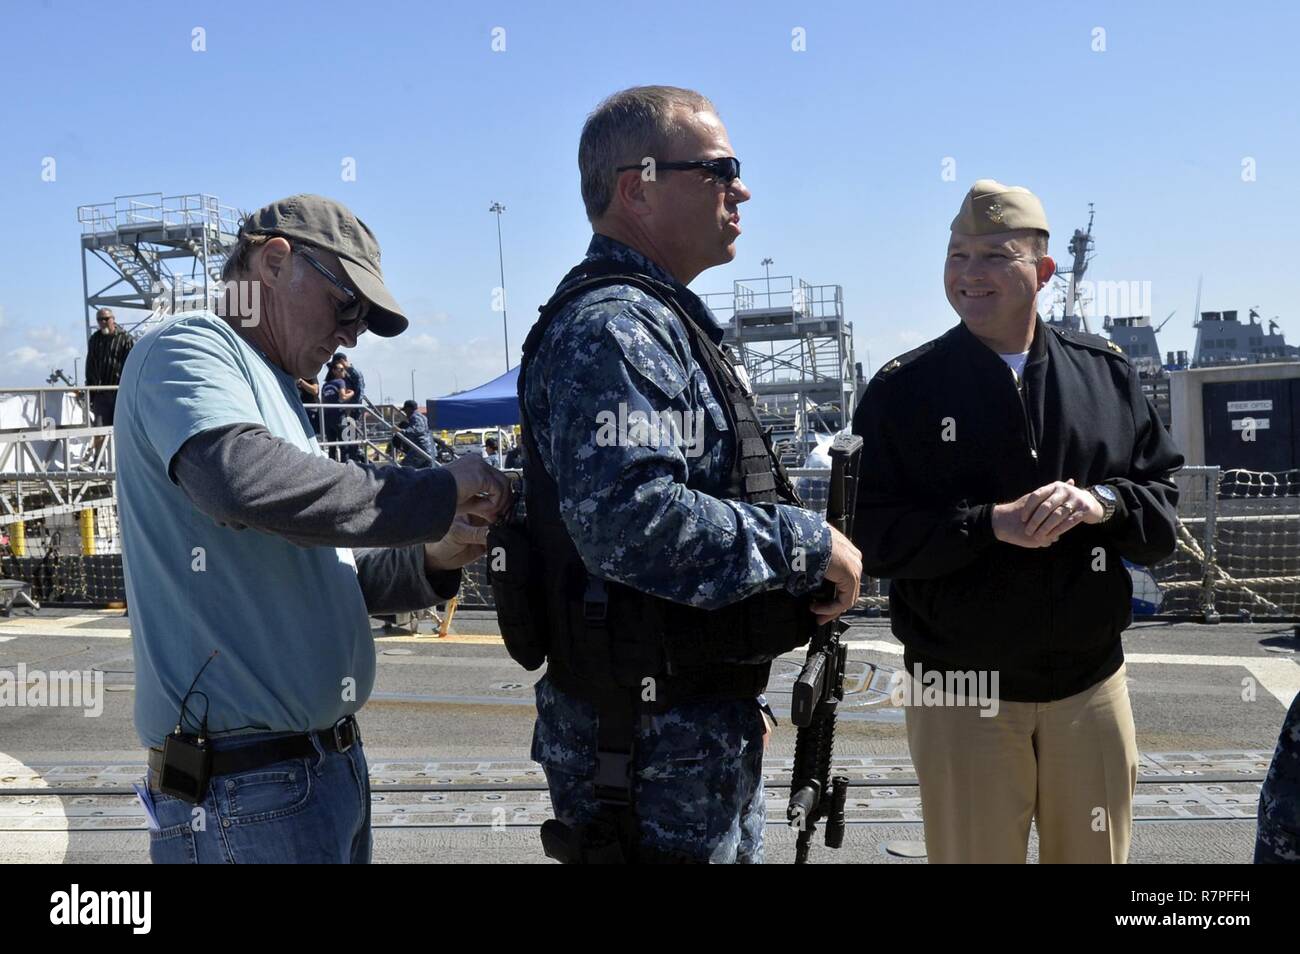 SAN DIEGO (March 23, 2017) Naval Base San Diego Command Master Chief Matt Ruane explains the history of the California naval base to actor Adam Baldwin prior to the filming of the television show 'The Last Ship'. Stock Photo